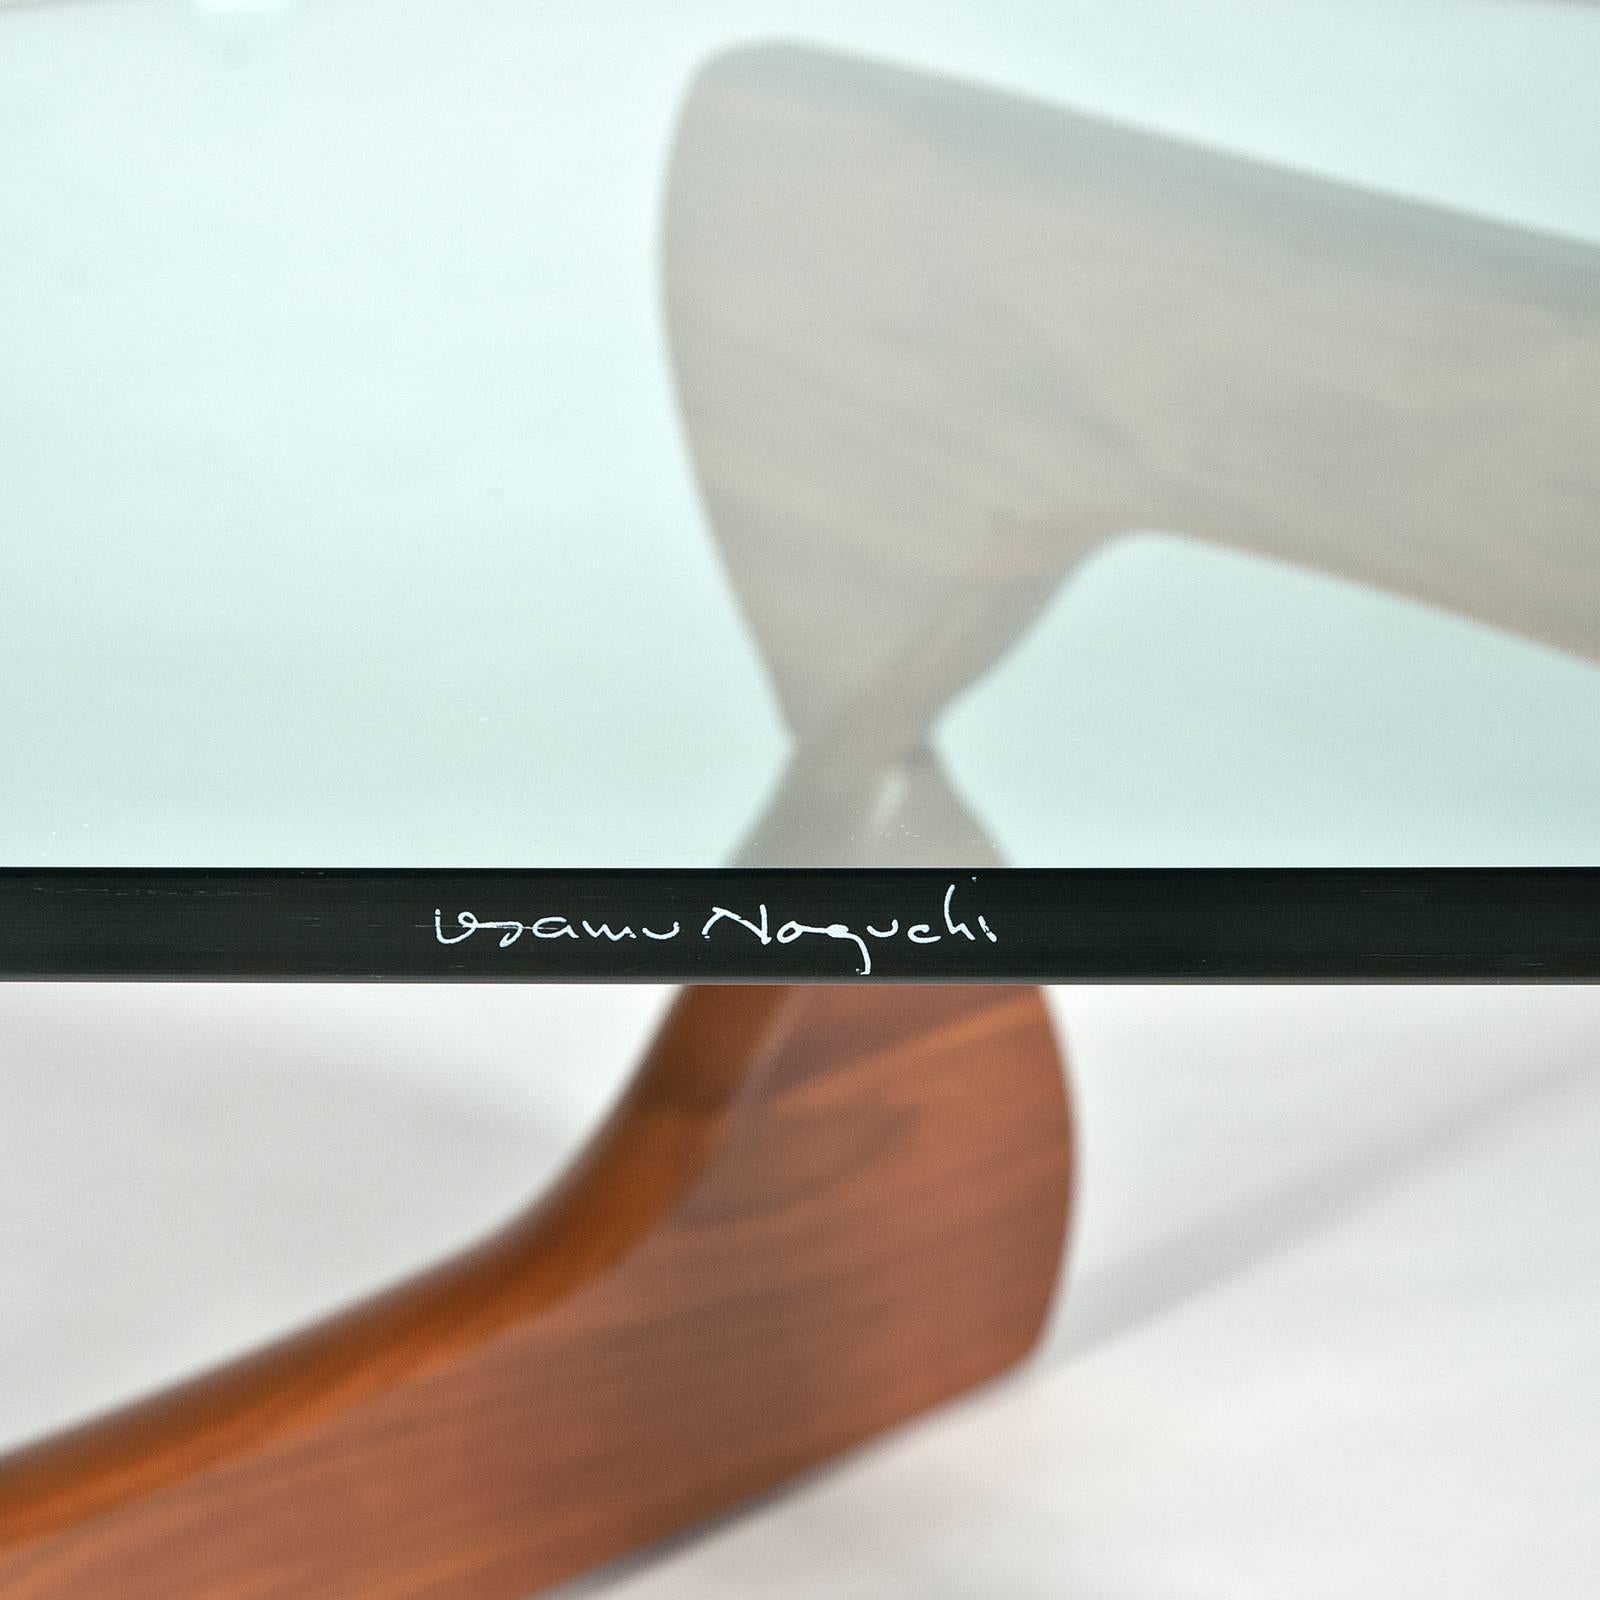 Designed in 1948. Made in the USA. Authentic table by Herman Miller. Note signature tag on bottom of base and etched signature on edge of glass. From circa 2010 production in very good condition with wear consistent with age.

An iconic table